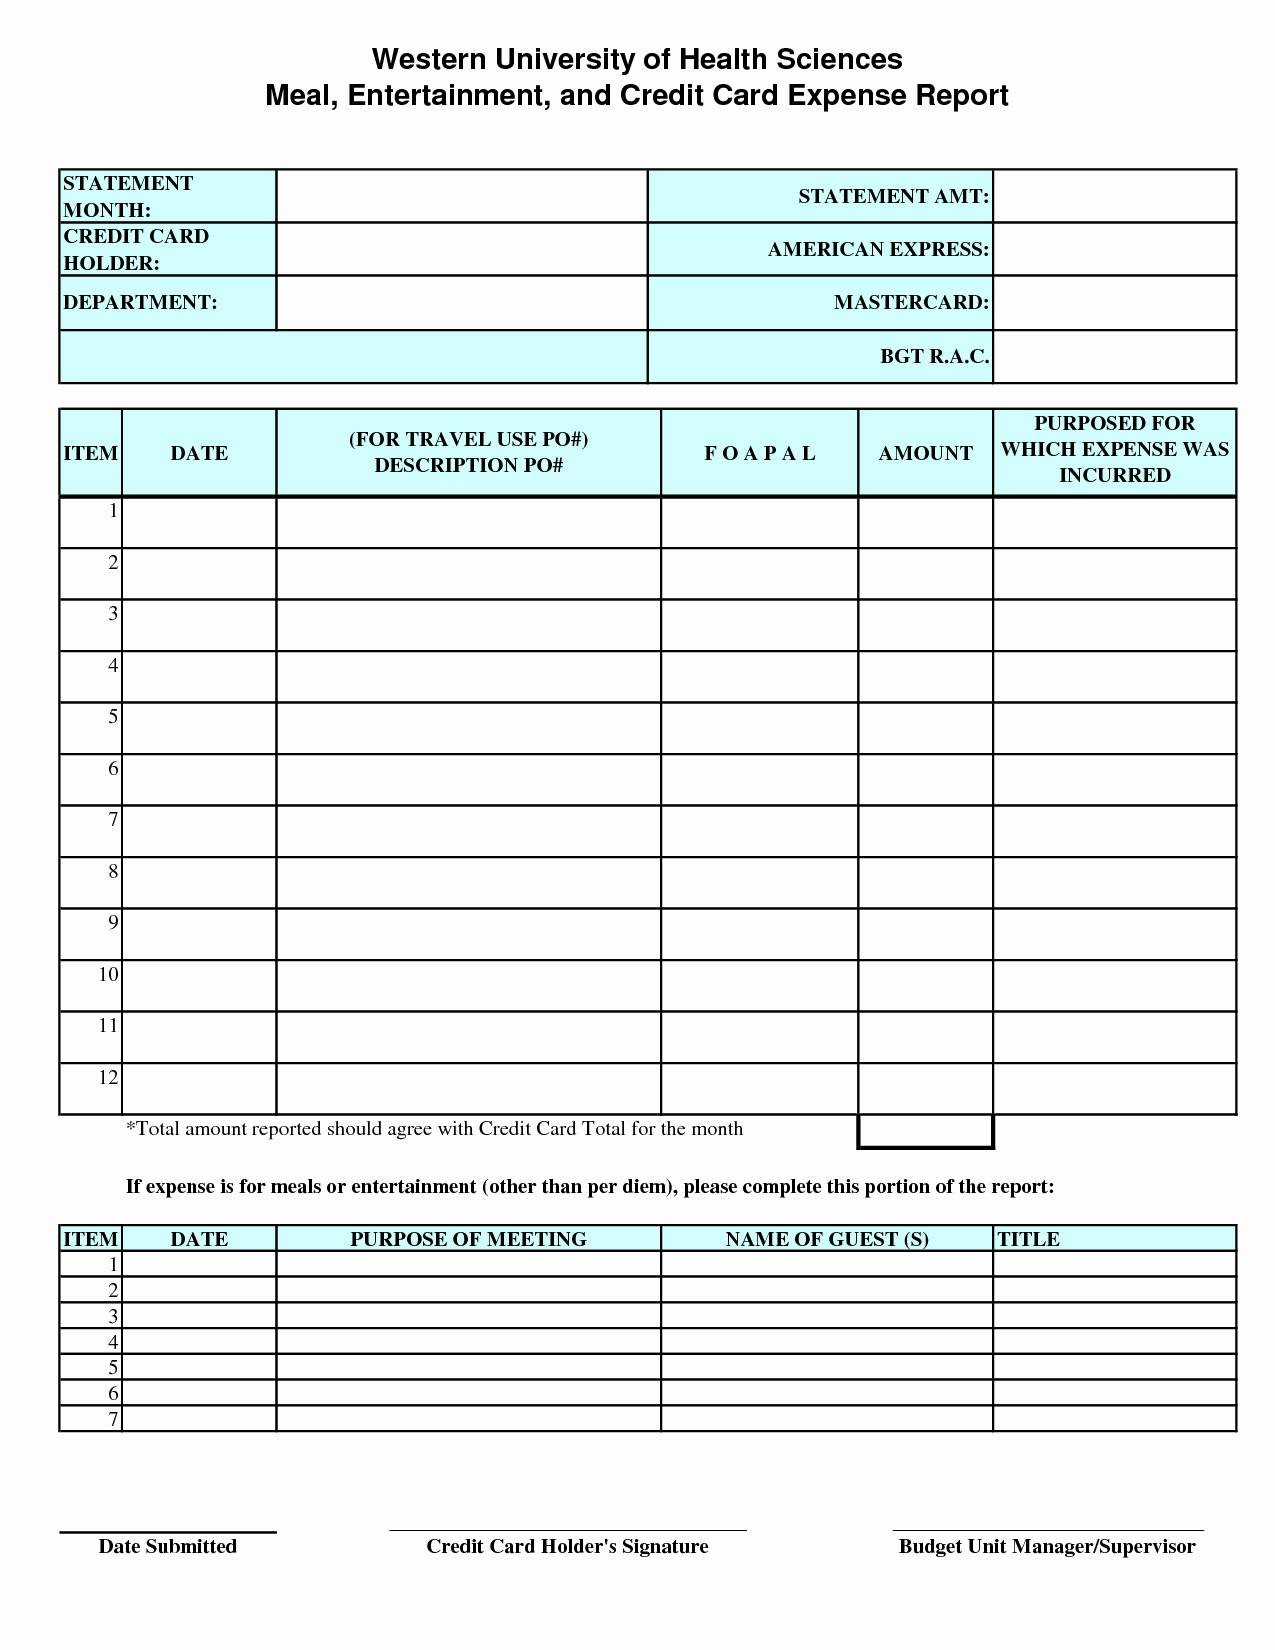 Credit Card Expense Report Template Forms   Fillable & Printable 